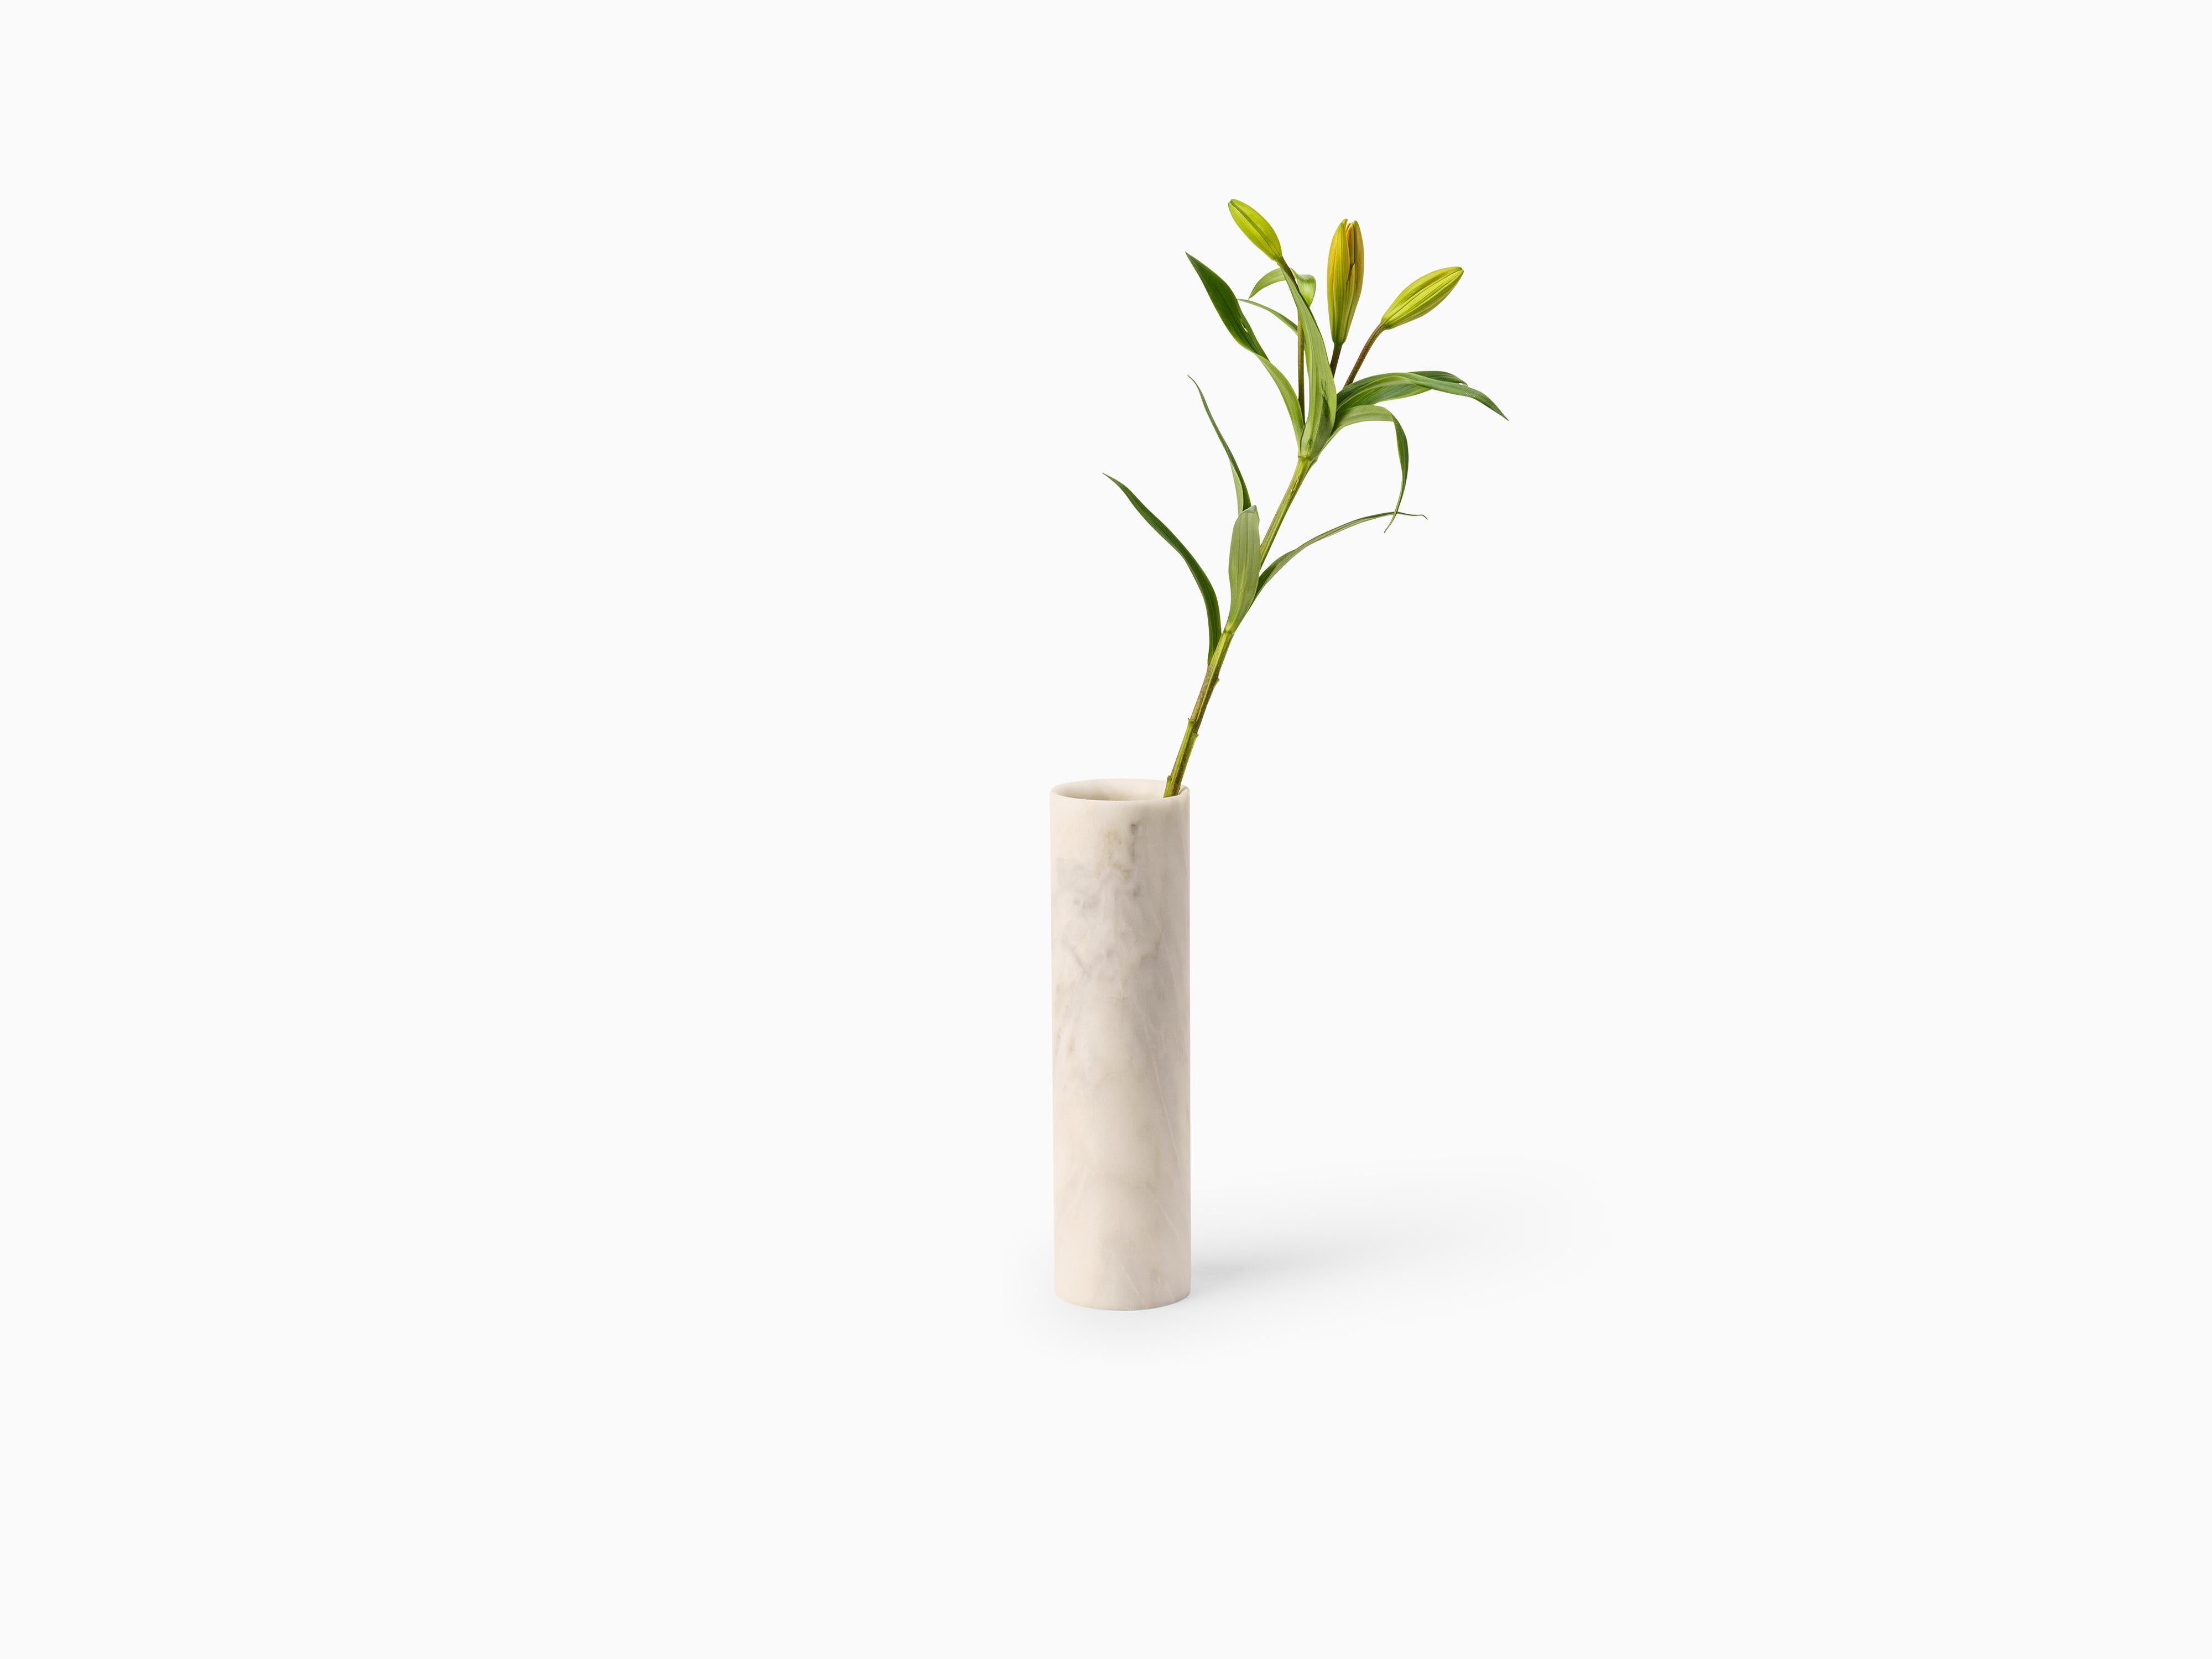 Born of the natural characteristics of Estremoz marble, the AMA vases are an elegant and simple display for fresh flowers, dried botanicals, or faux blooms, among many other uses. Manuel Aires Mateus imagined a vase showing an unexpected material